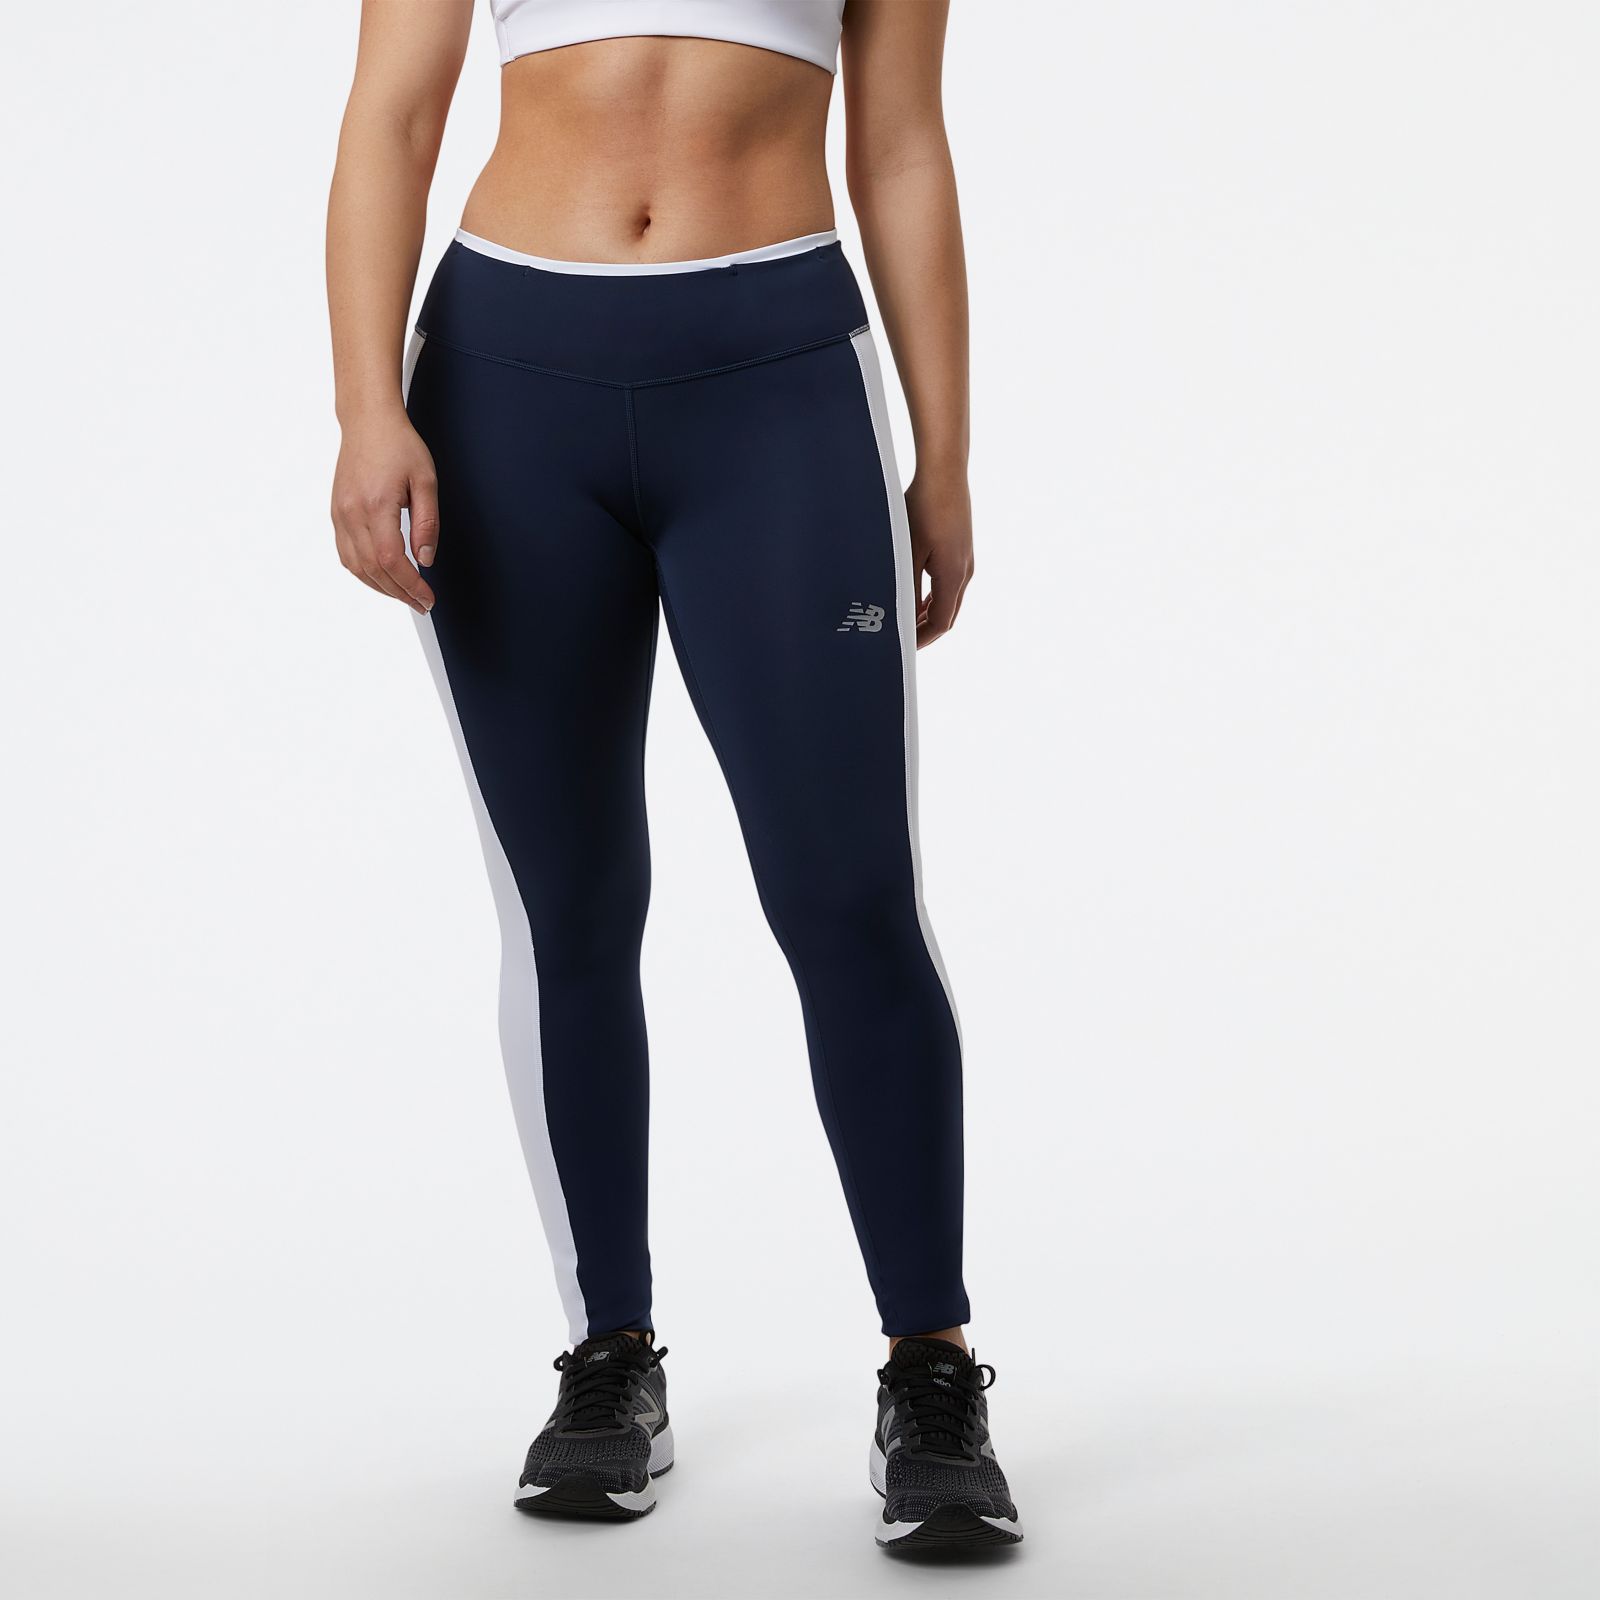 New Balance Reflective Accelerate Tights - Running tights Women's, Buy  online